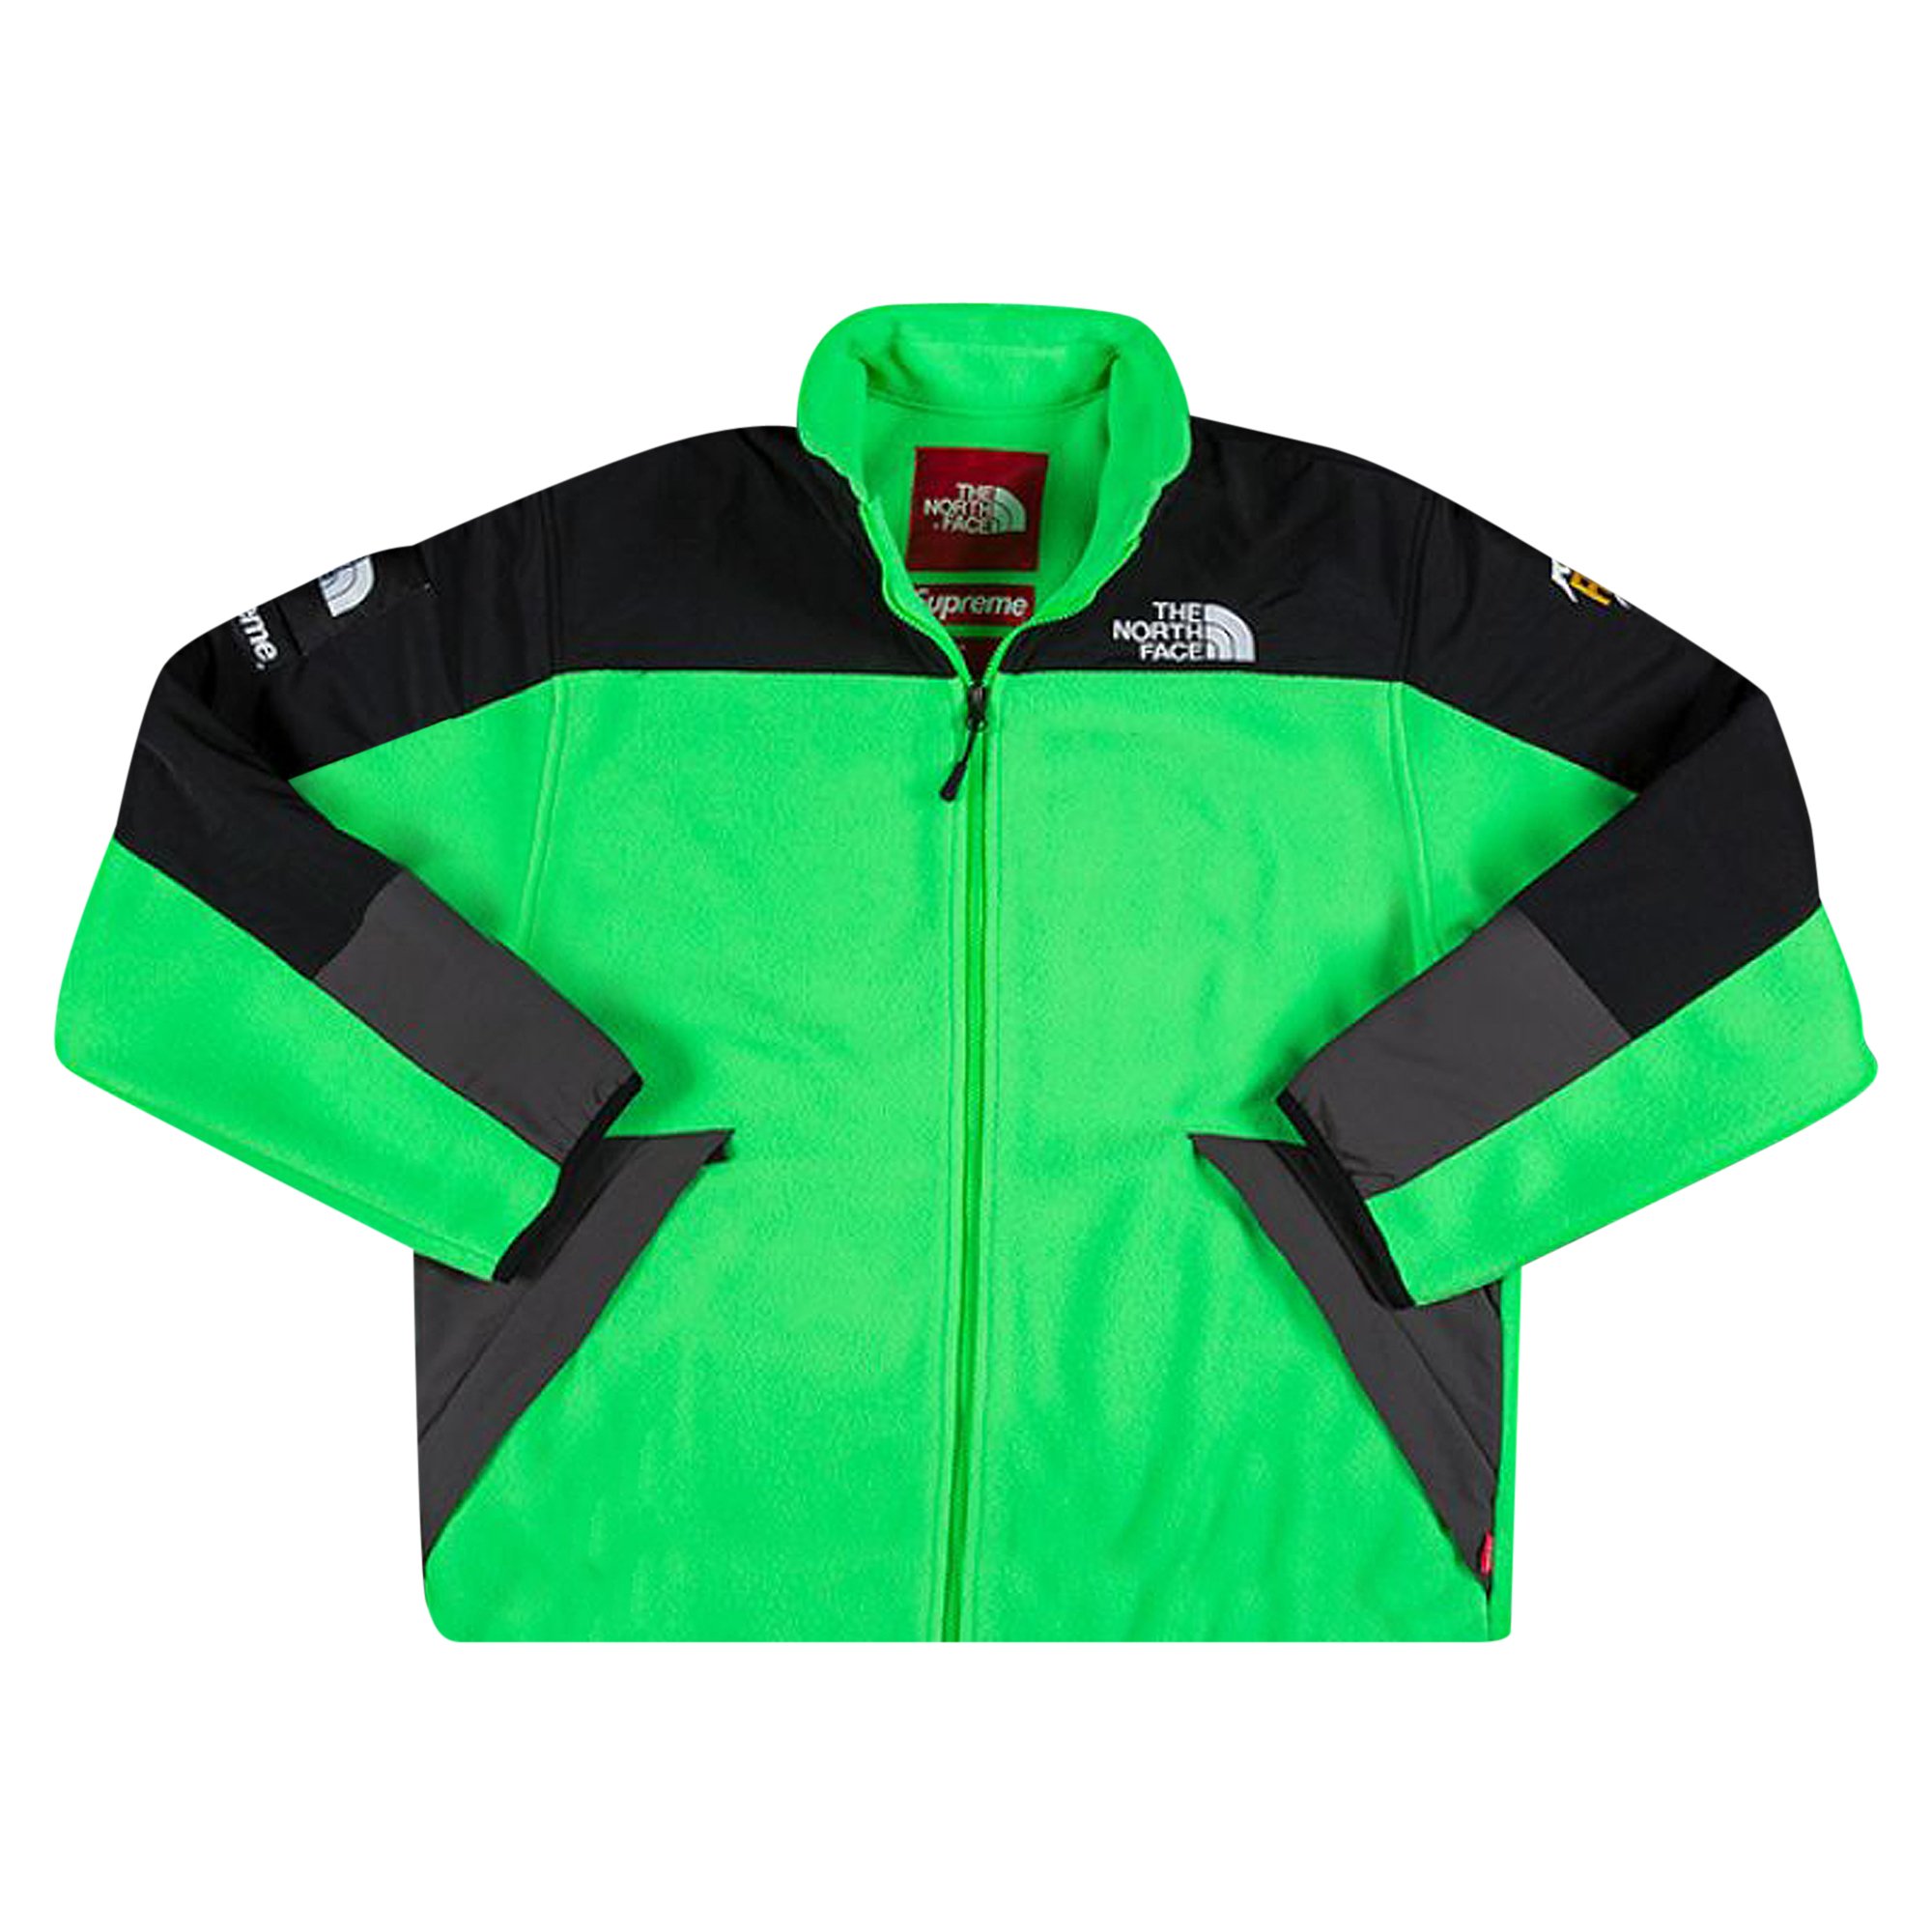 Supreme x The North Face RTG Fleece Jacket 'Bright Green'